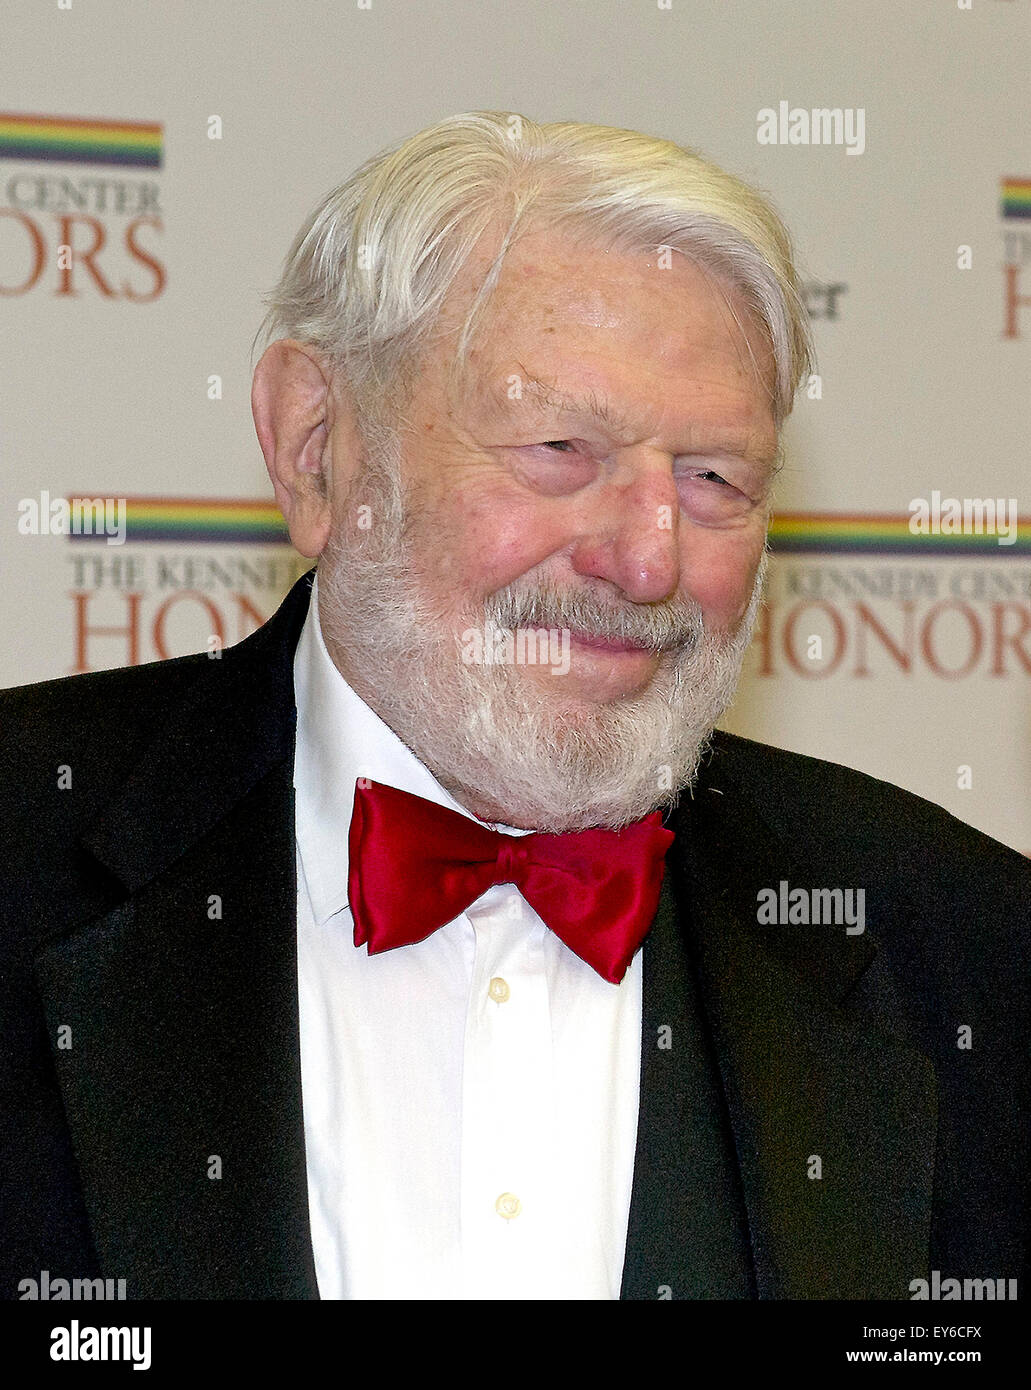 Theodore Bikel arrives for the formal Artist's Dinner honoring the recipients of the 2012 Kennedy Center Honors hosted by United States Secretary of State Hillary Rodham Clinton at the U.S. Department of State in Washington, DC on Saturday, December 1, 2012. The 2012 honorees are Buddy Guy, actor Dustin Hoffman, late-night host David Letterman, dancer Natalia Makarova, and the British rock band Led Zeppelin (Robert Plant, Jimmy Page, and John Paul Jones). Mr. Bikel passed away in Los Angeles on Tuesday, July 21, 2015 at the age of 91. Credit: Ron Sachs/CNP Stock Photo